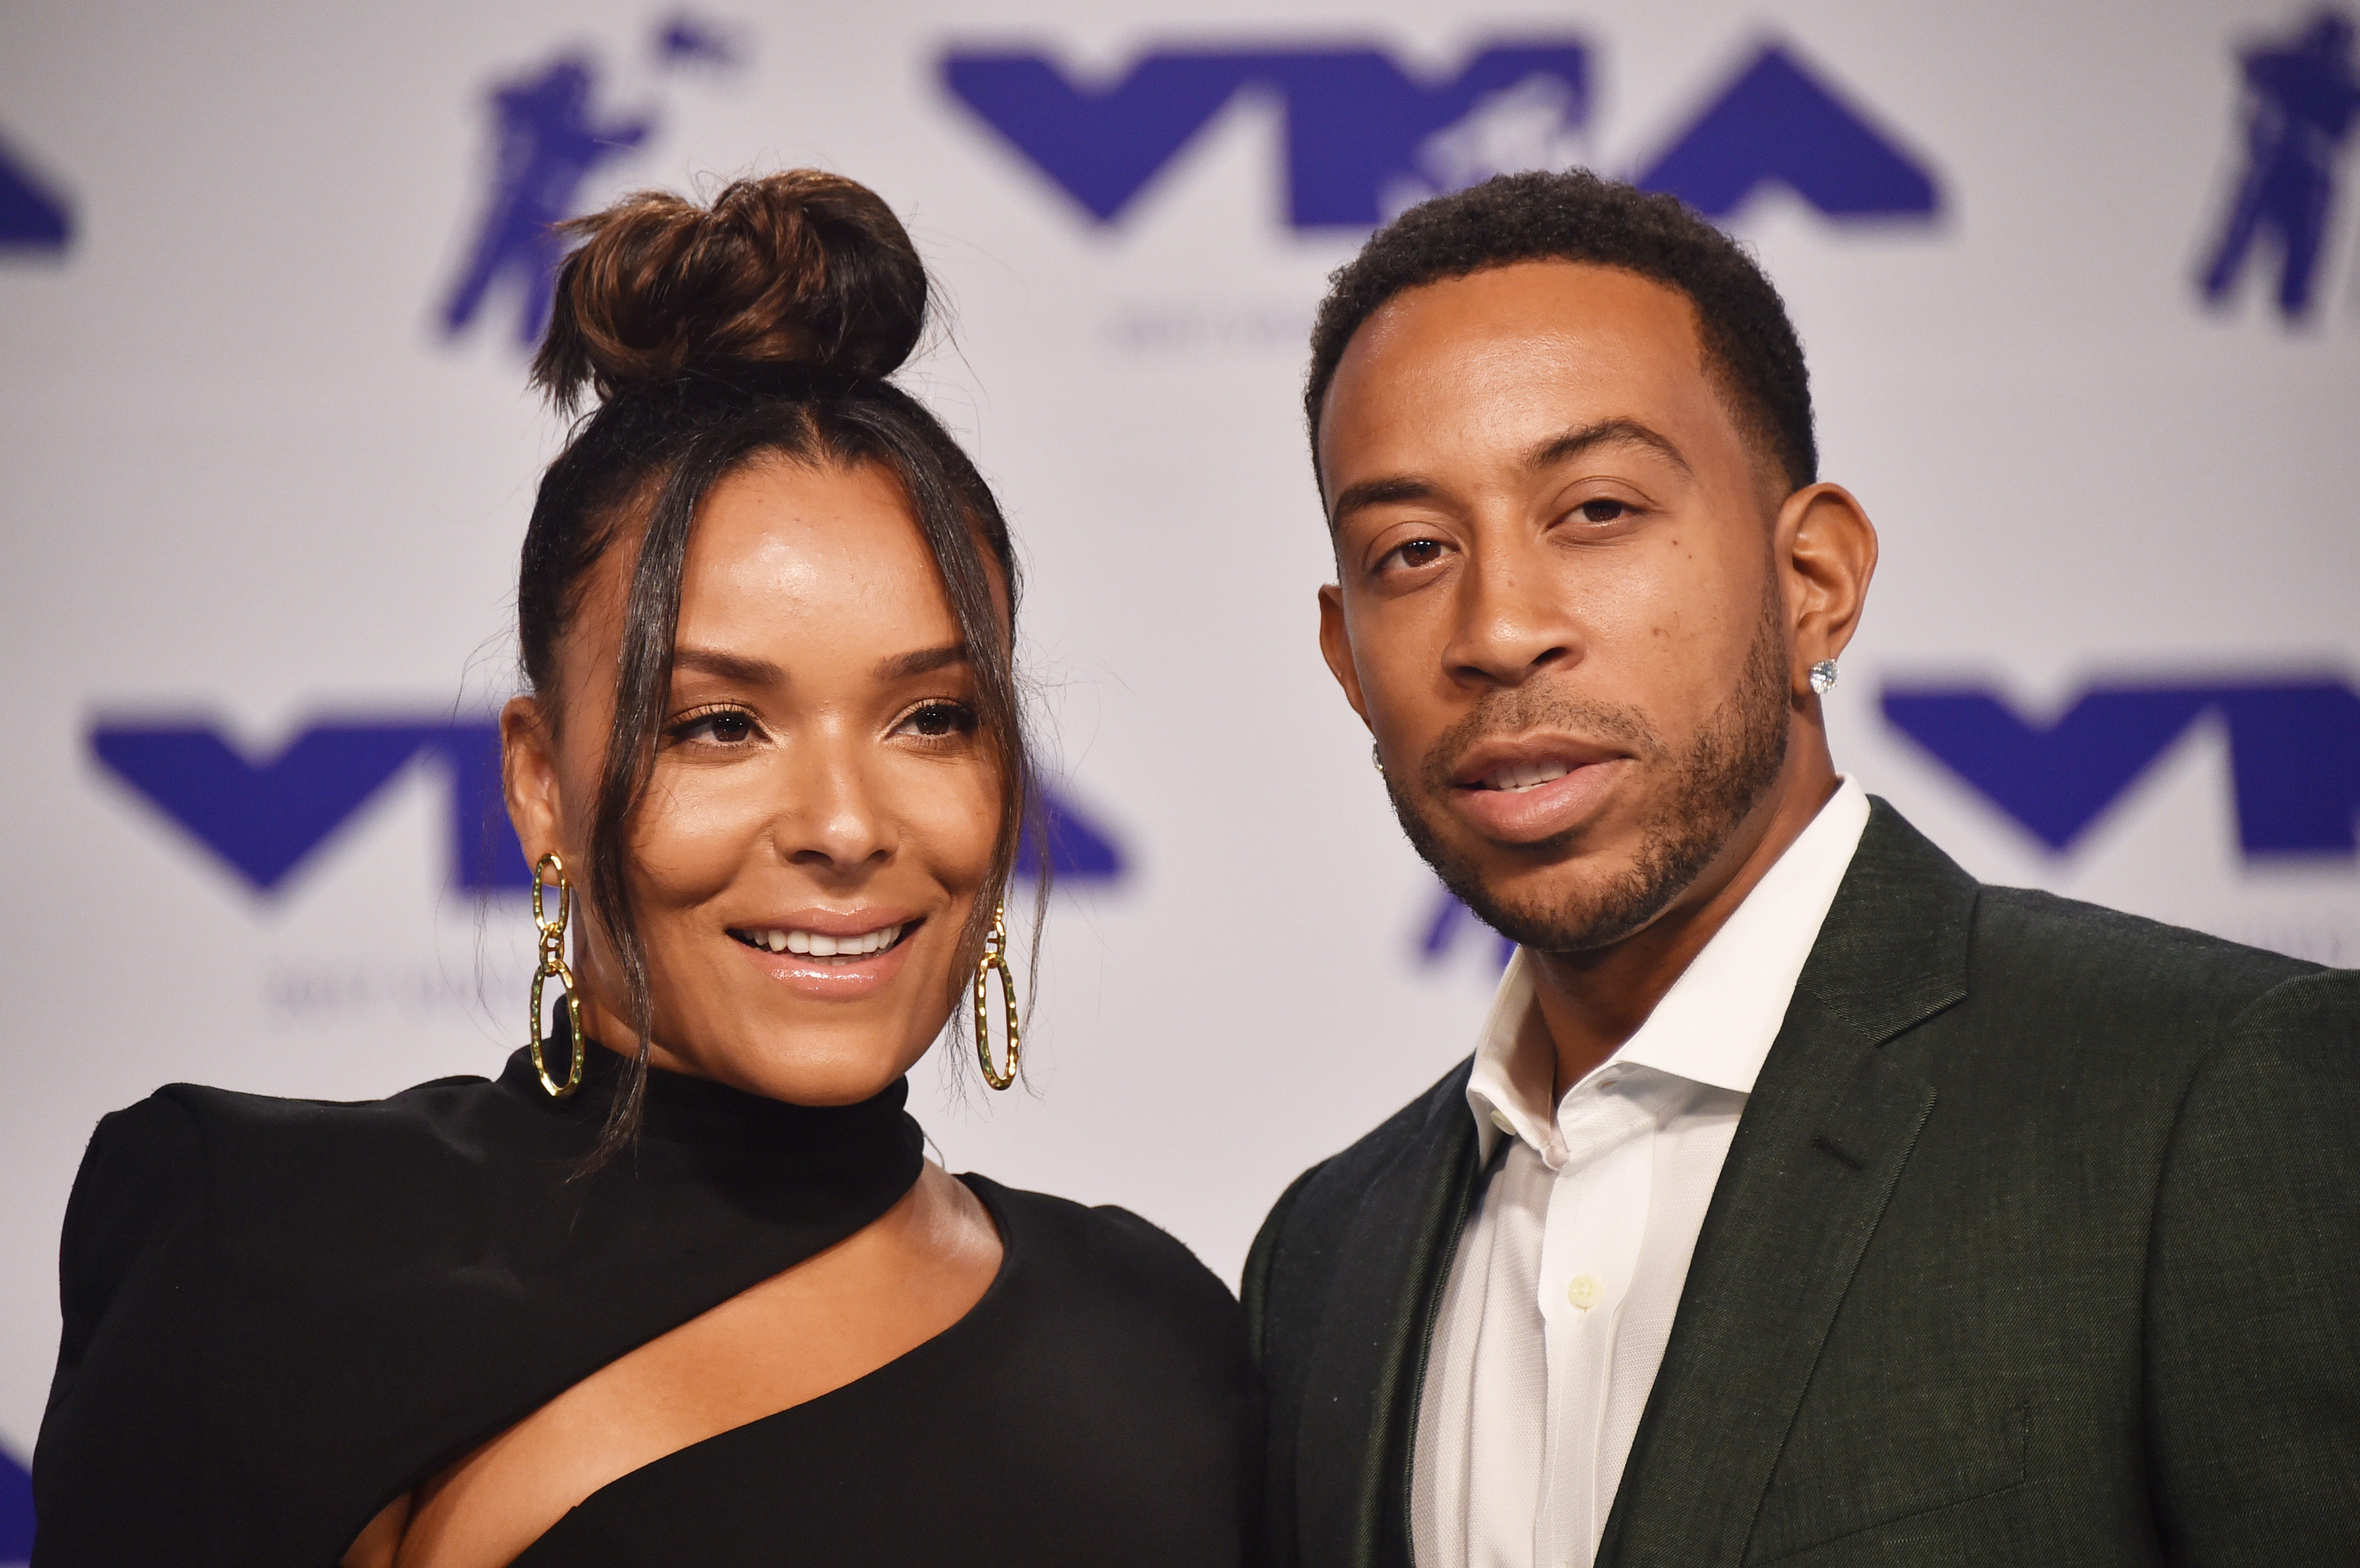 Eudoxie Explains Staying With Ludacris After He Had Baby With Another Woman